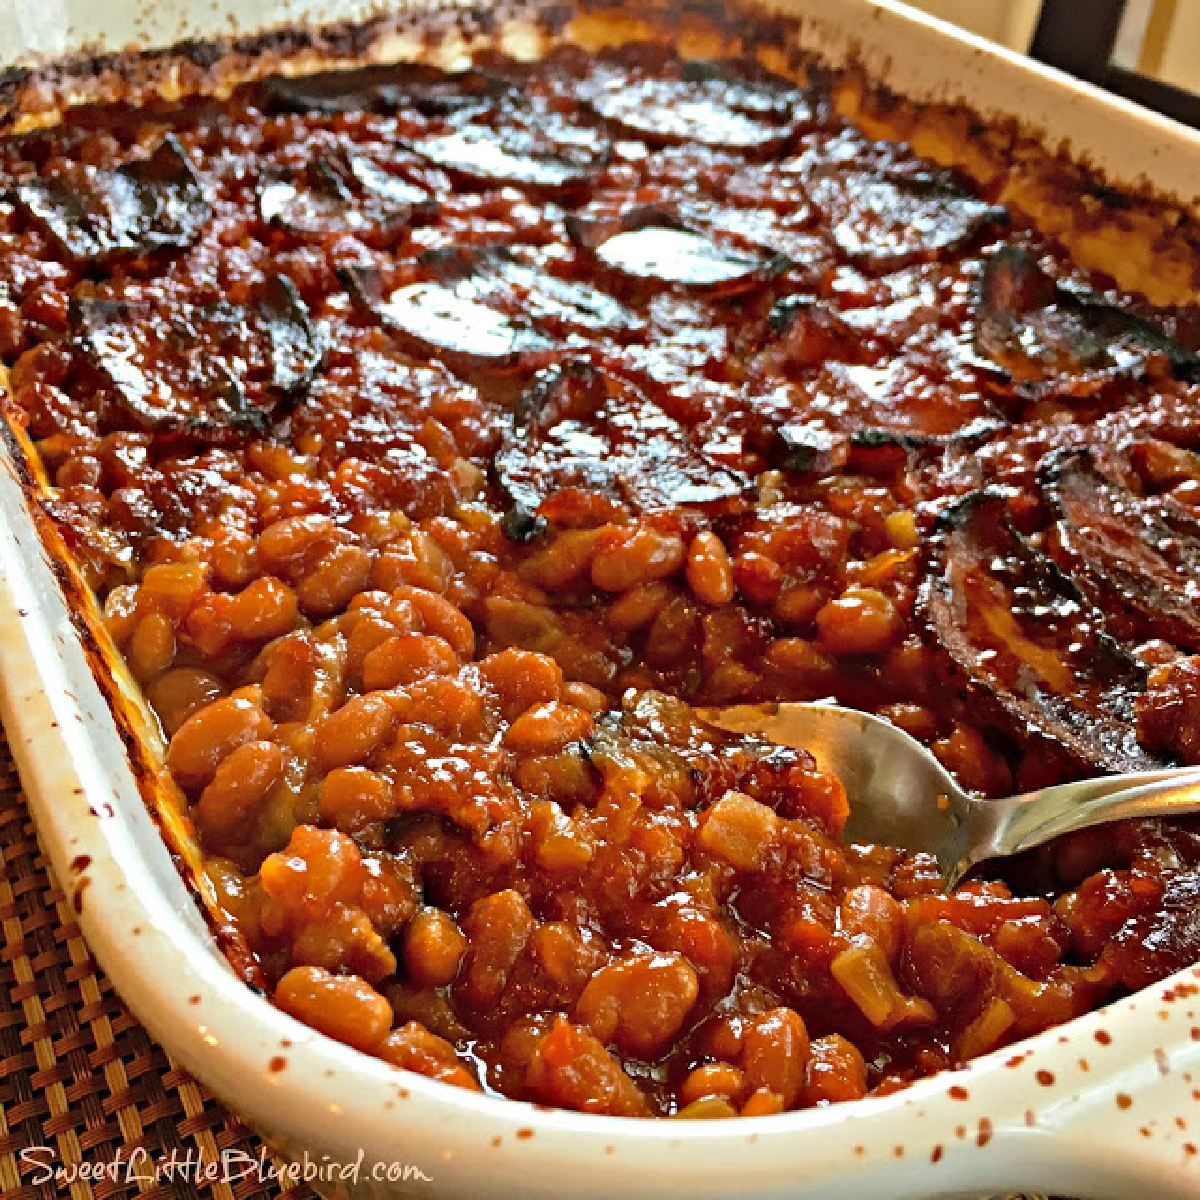 This is a photo of the Best Baked Beans (0ven or Slow Cooker), after baking in a white casserole dish with a spoon, ready to serve. 